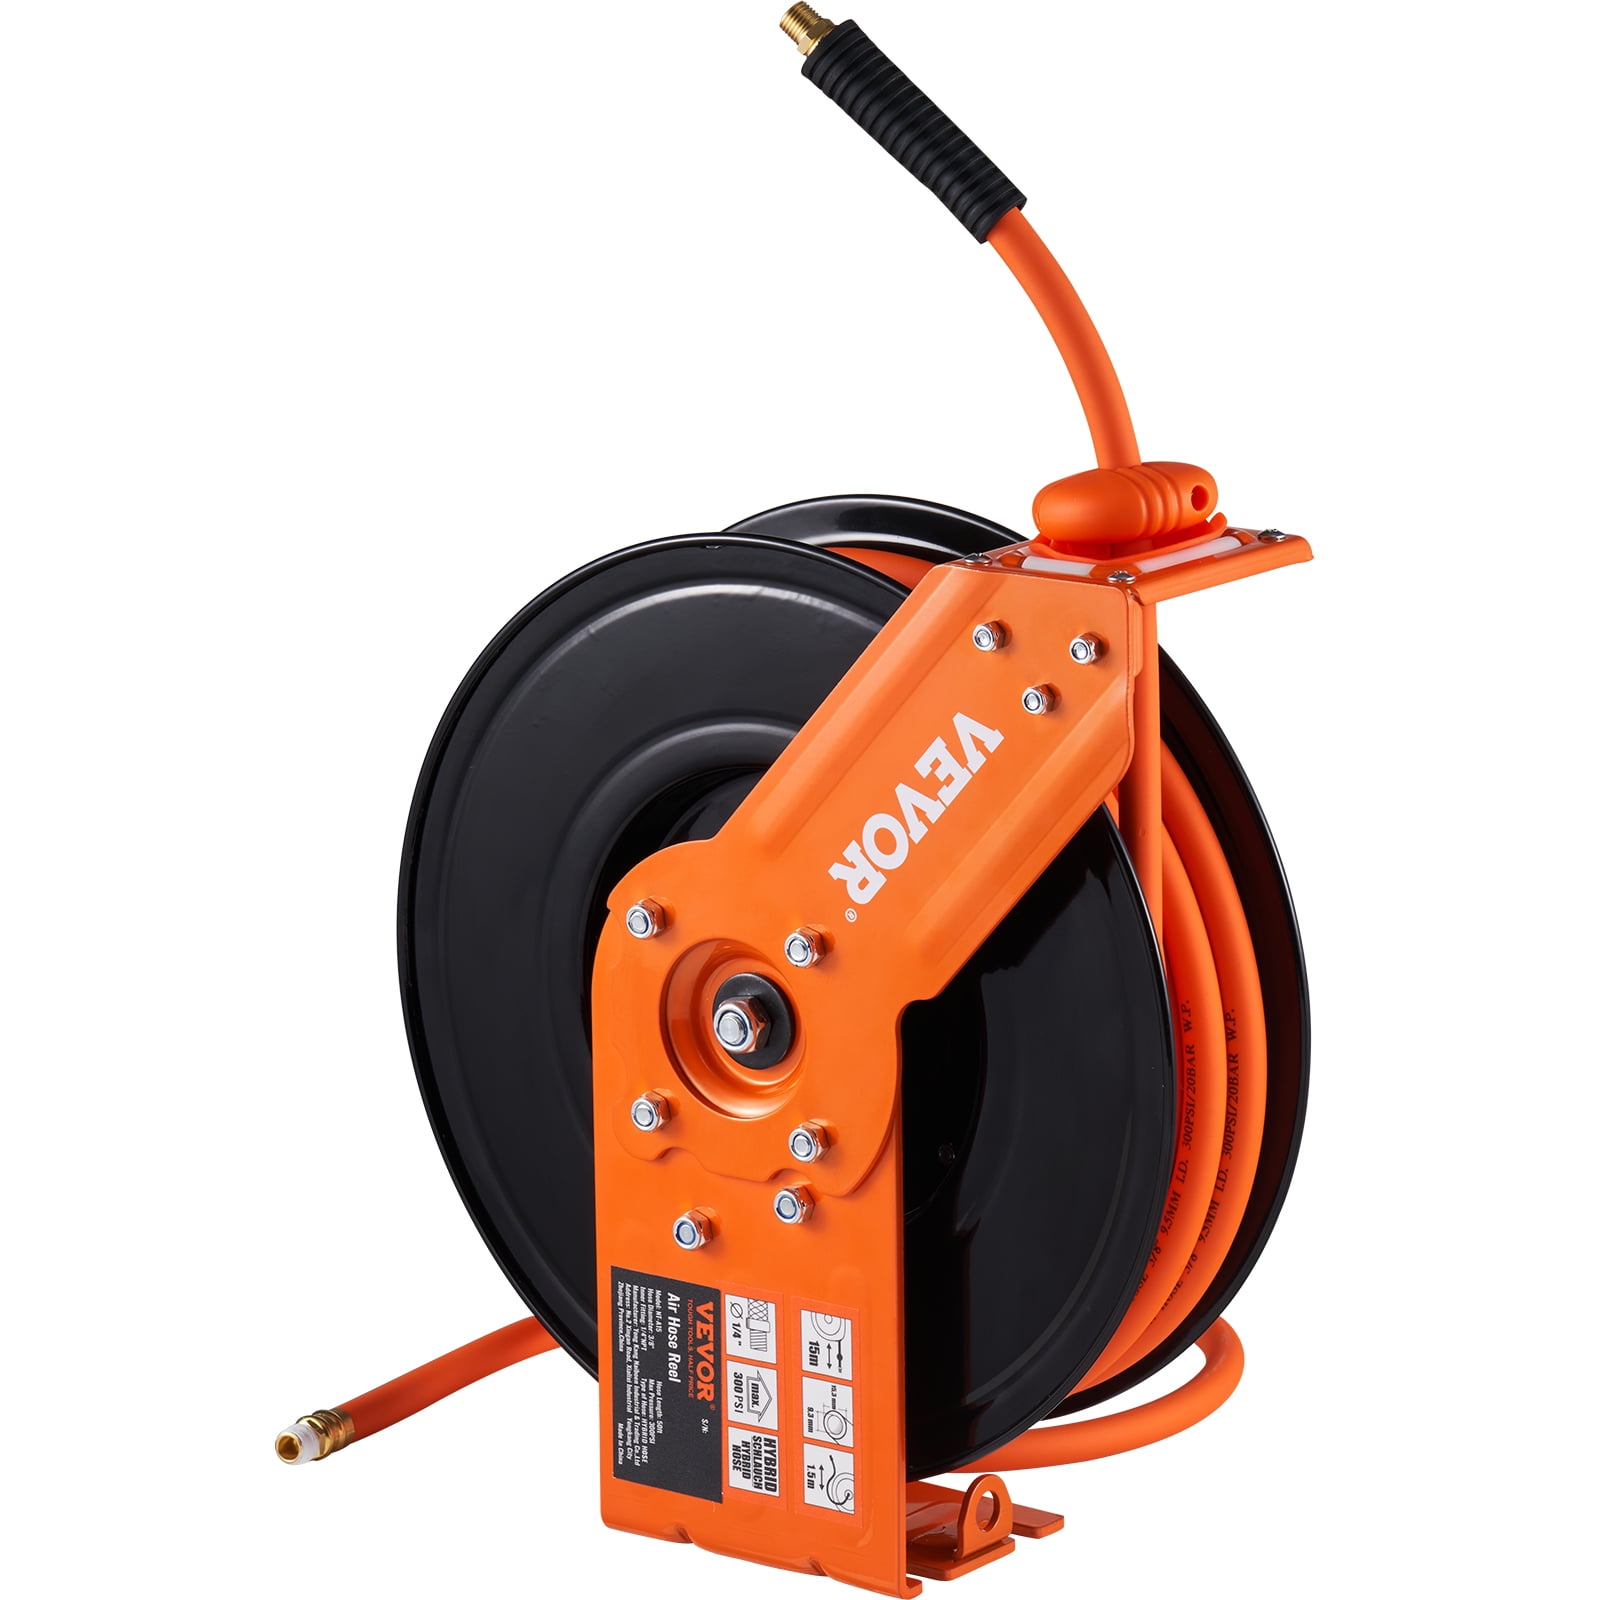 Air Hose Reel Retractable 3/8 in. x 50 ft Hybrid Polymer Hose, Retractable  Auto-Rewind Enclosed Heavy Duty 180° Swivel Mount, Max 300PSI Commerical